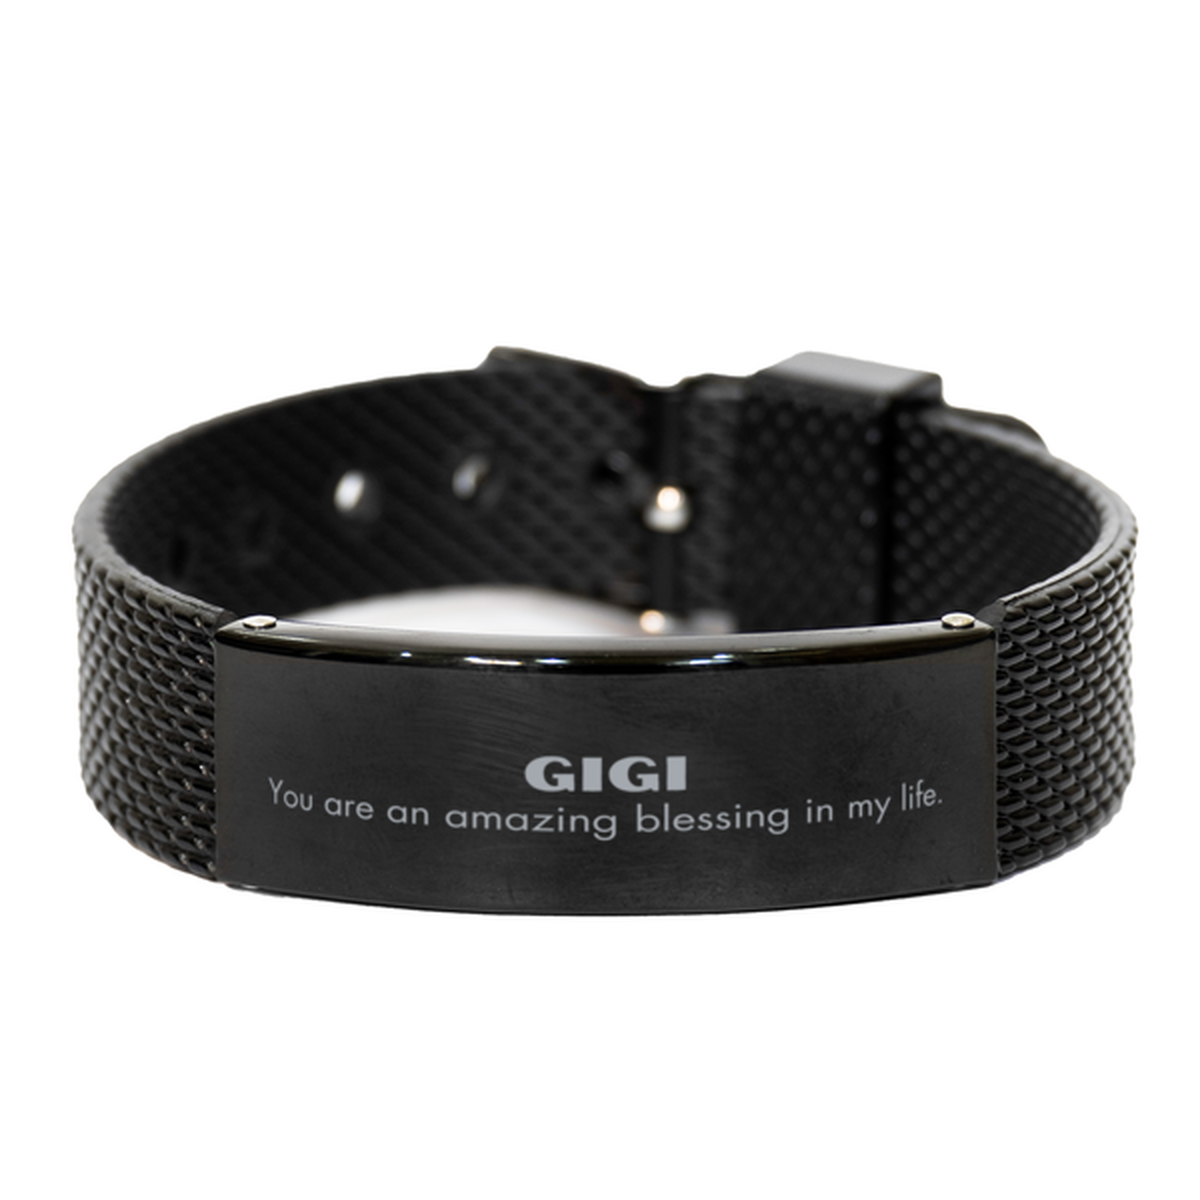 Gigi Black Shark Mesh Bracelet, You are an amazing blessing in my life, Thank You Gifts For Gigi, Inspirational Birthday Christmas Unique Gifts For Gigi